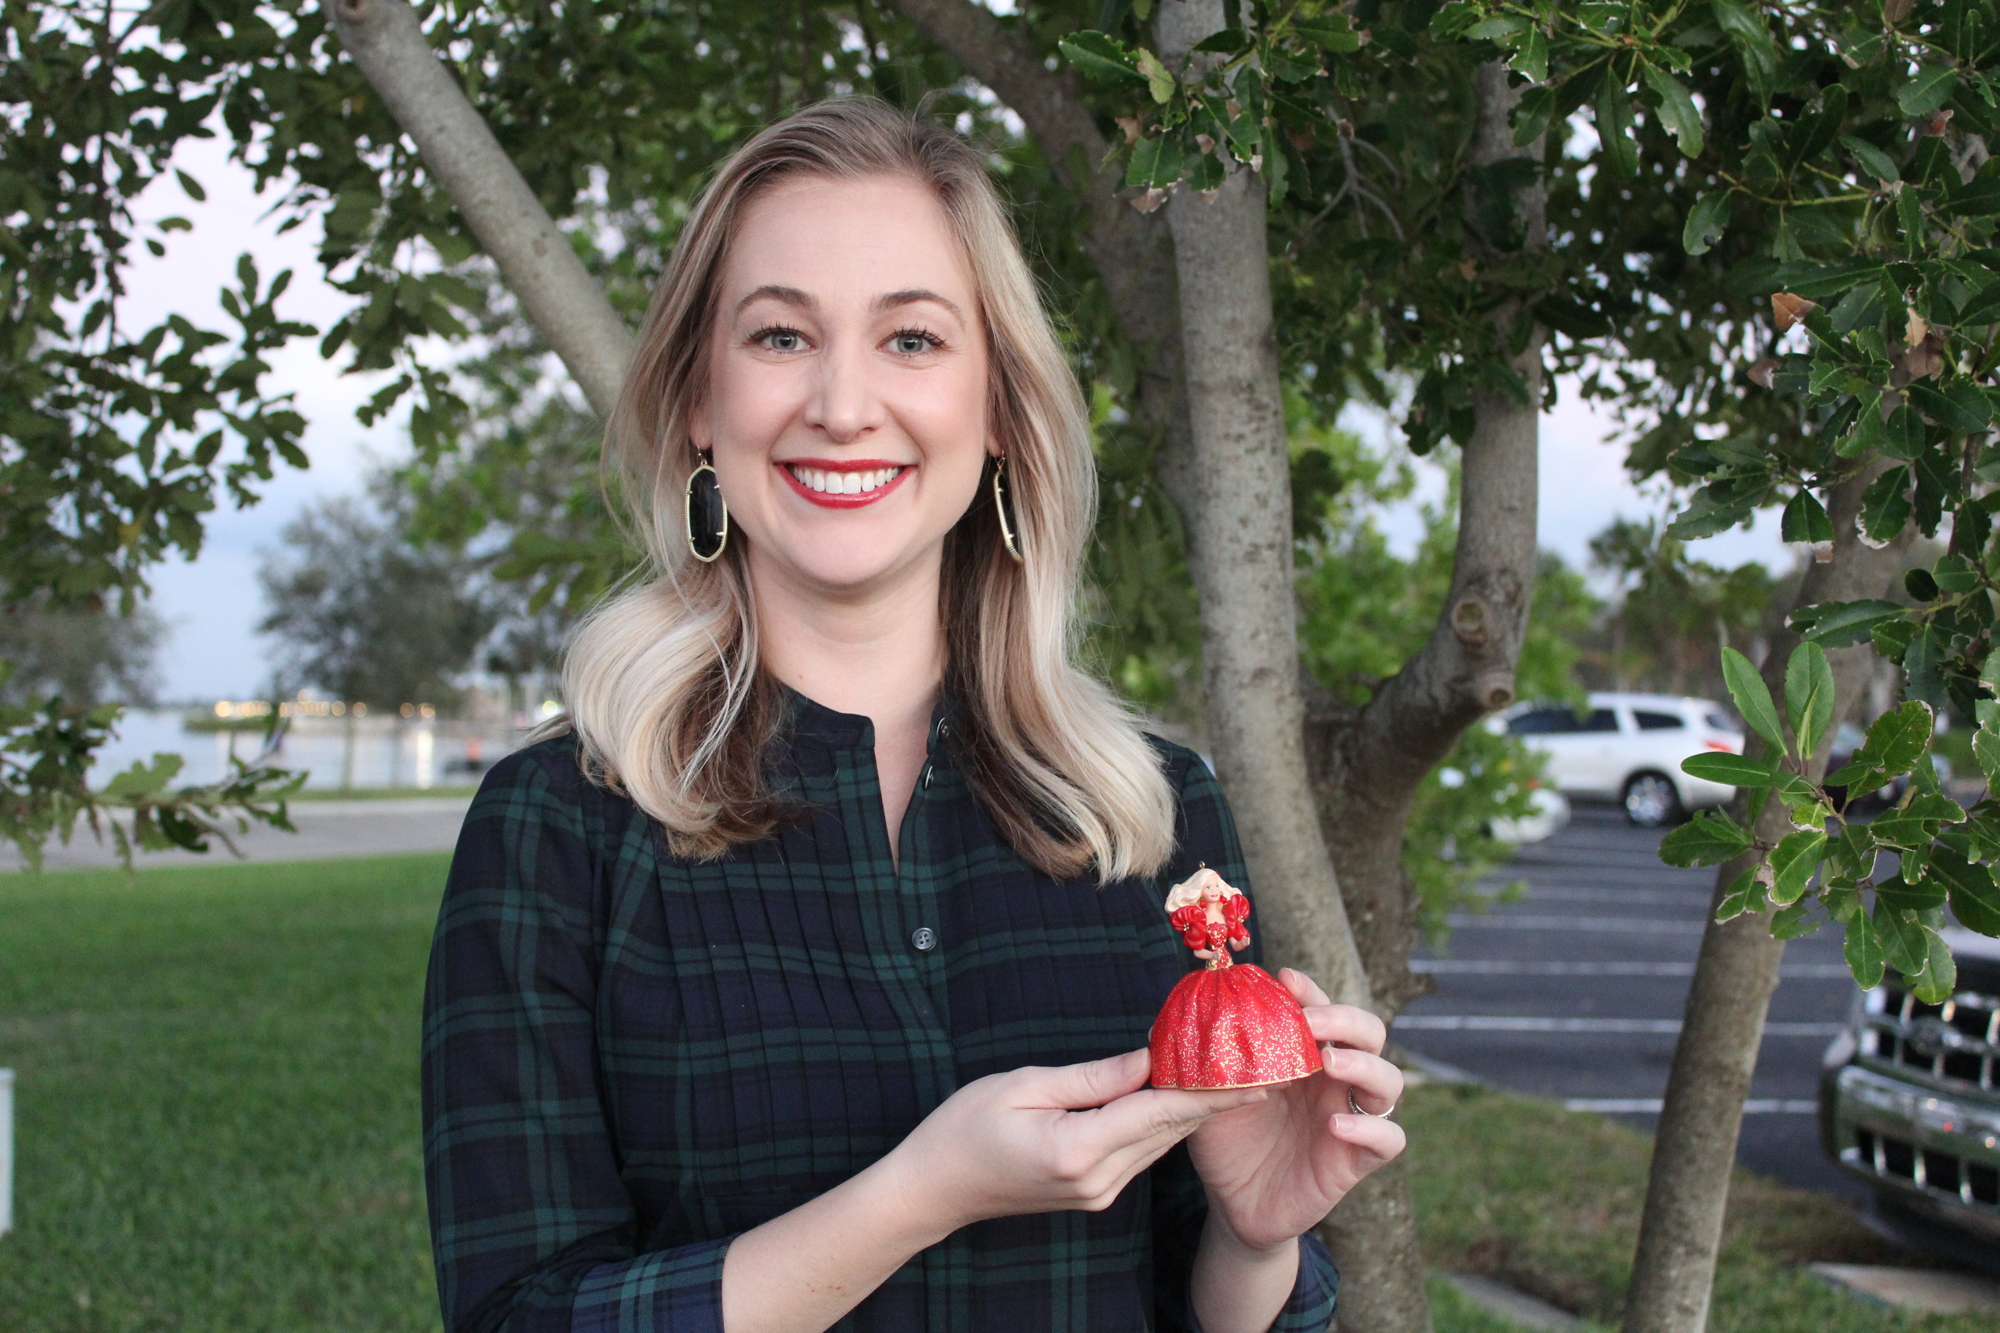 Lakewood Ranch's Amanda Tullidge still has the first ornament she ever received as a gift. Her Christmas ornaments hold great sentimental value.